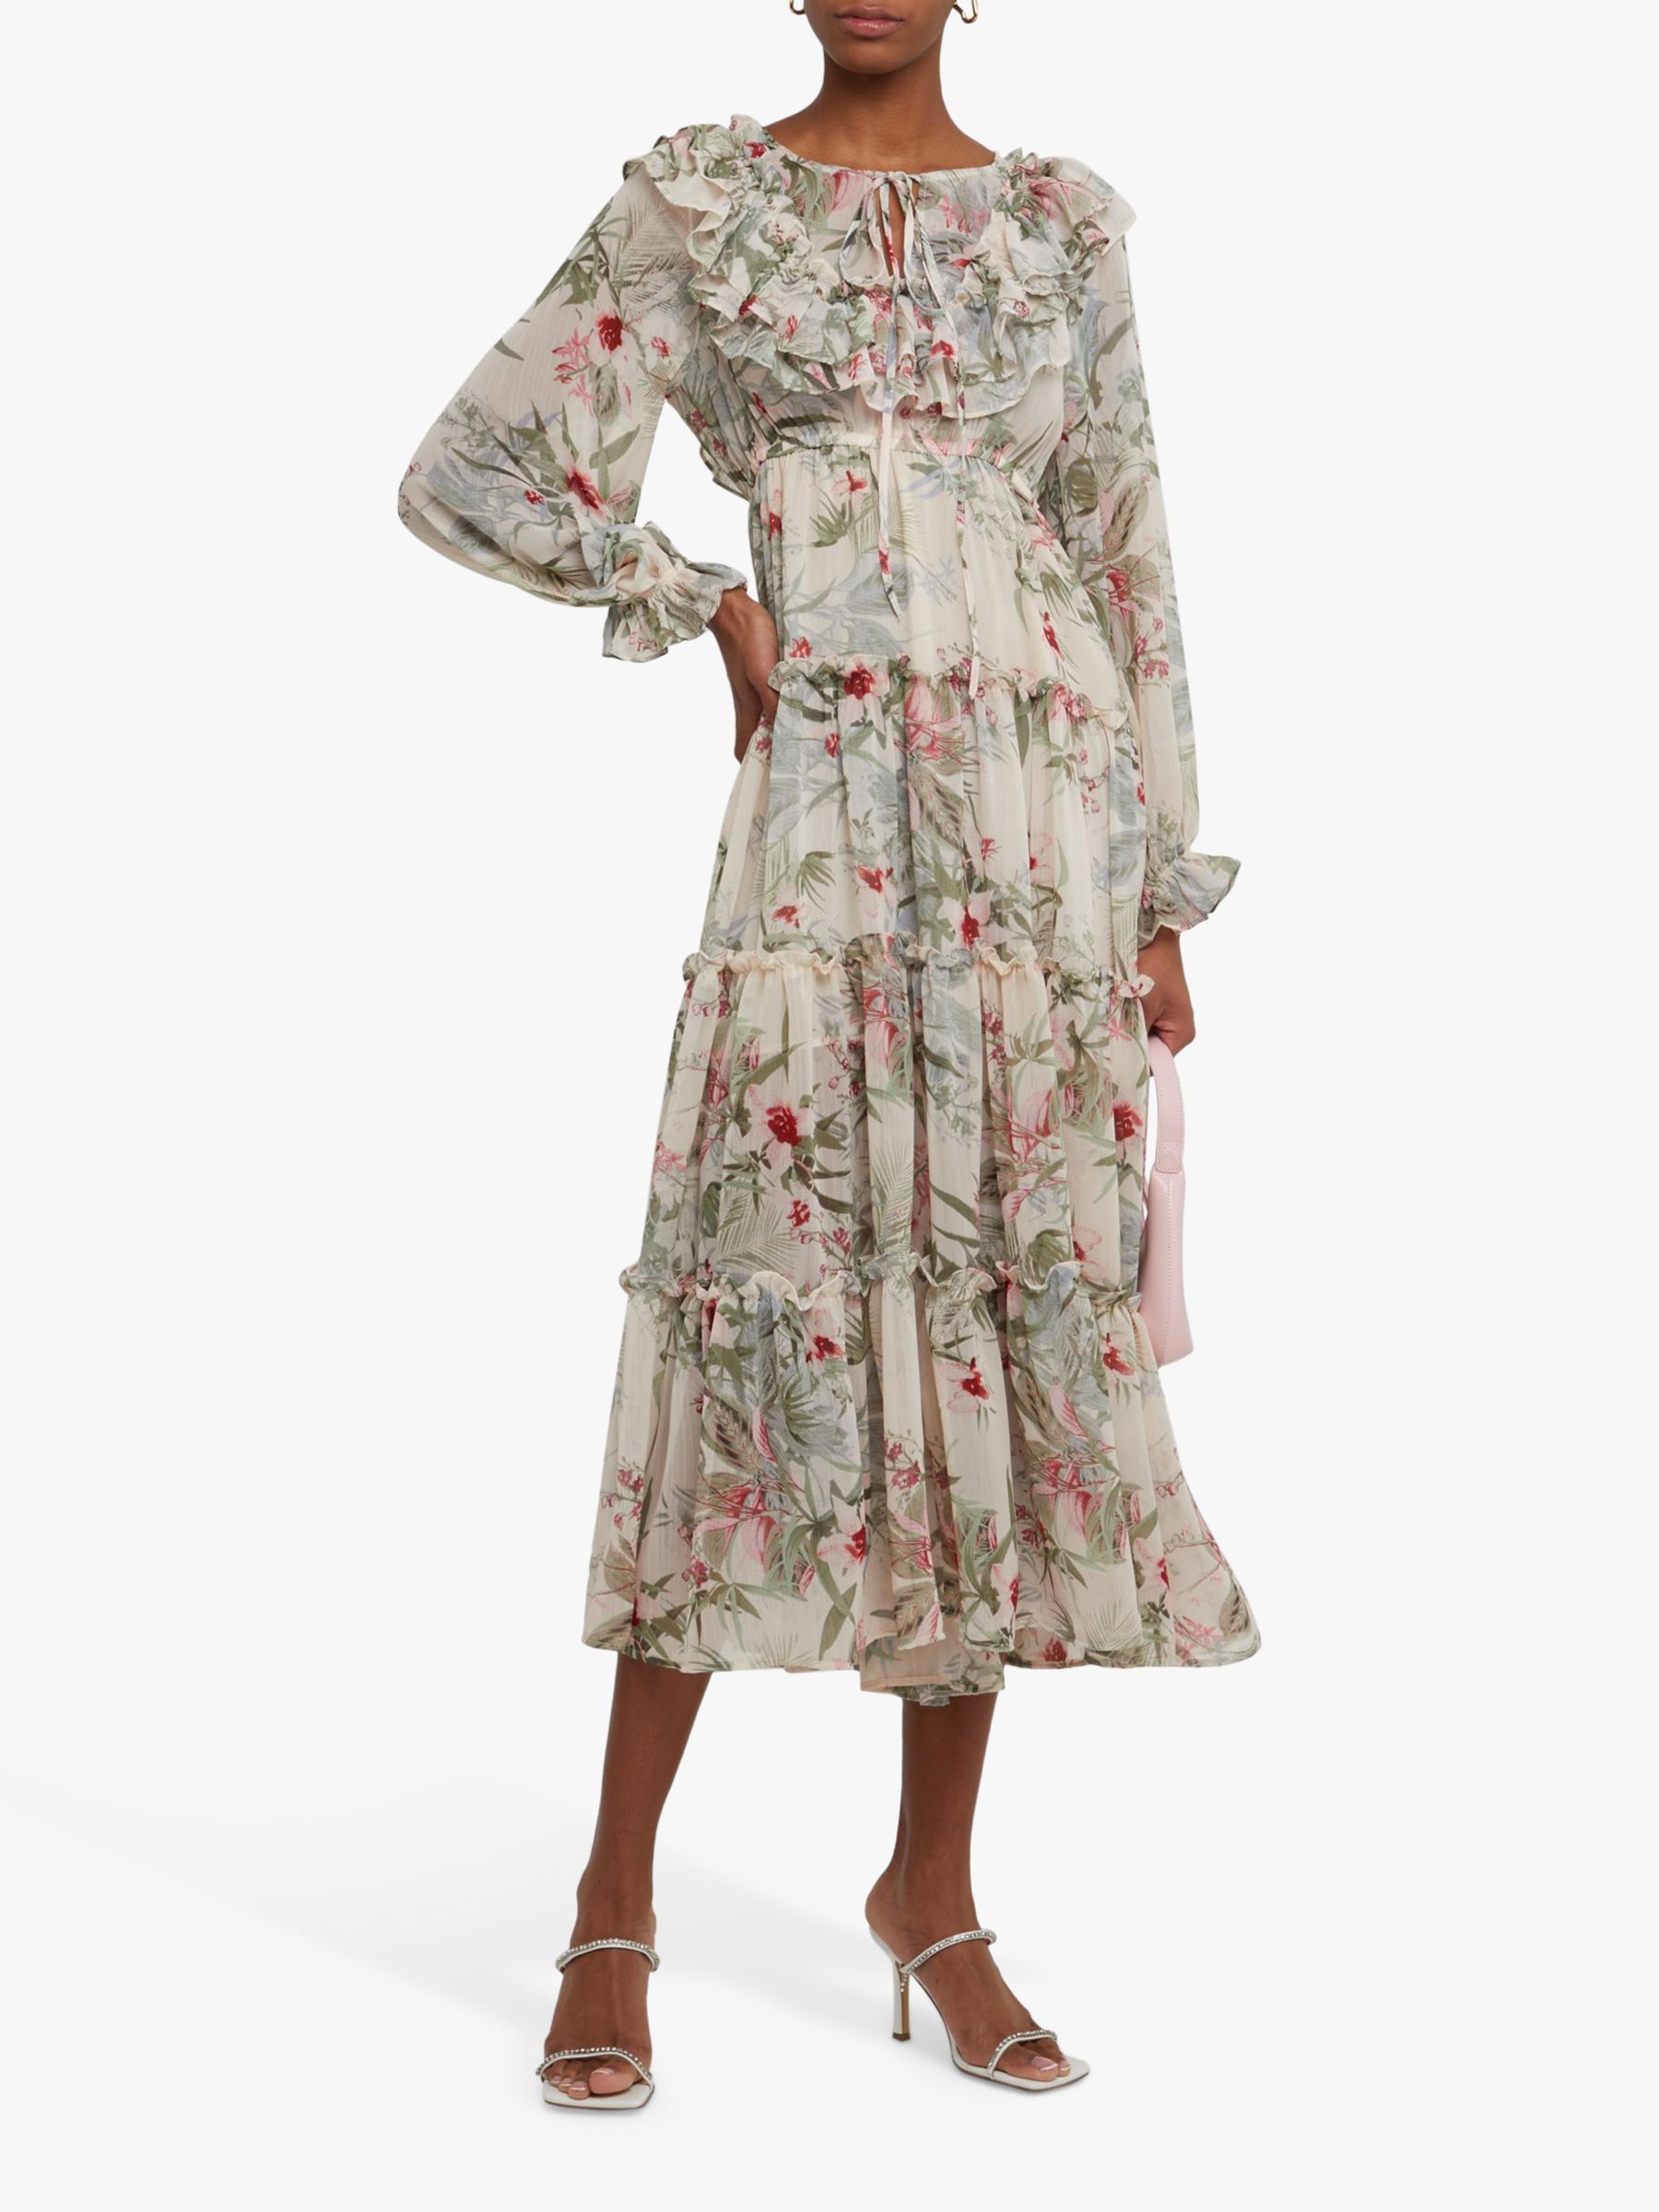 o.p.t Indria Floral Print Tiered Dress, Green/Multi at John Lewis ...